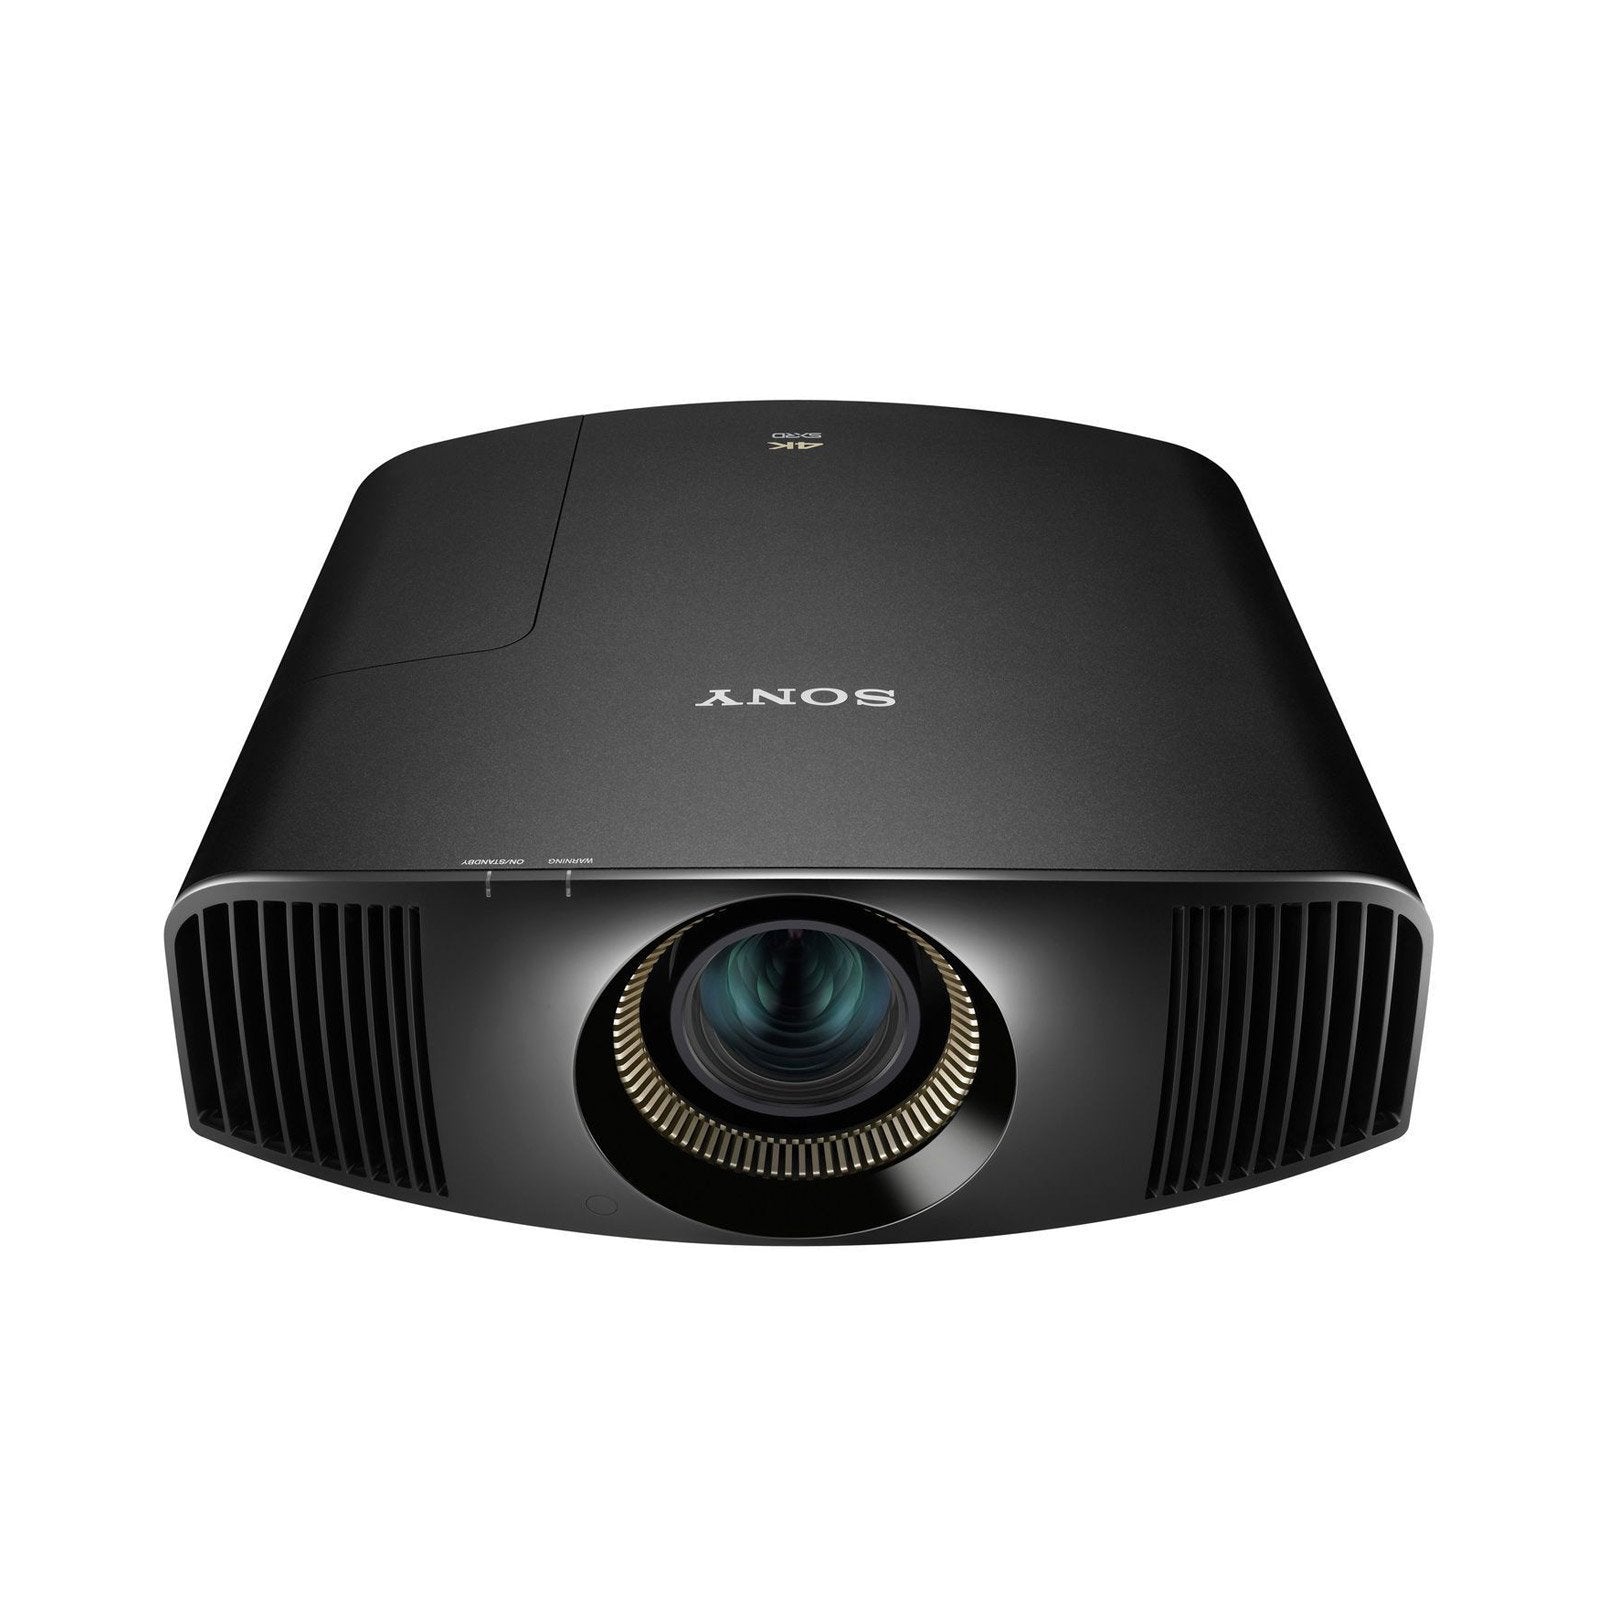 Sony VPLVW385ES 4K HDR Home Theater Video Projector